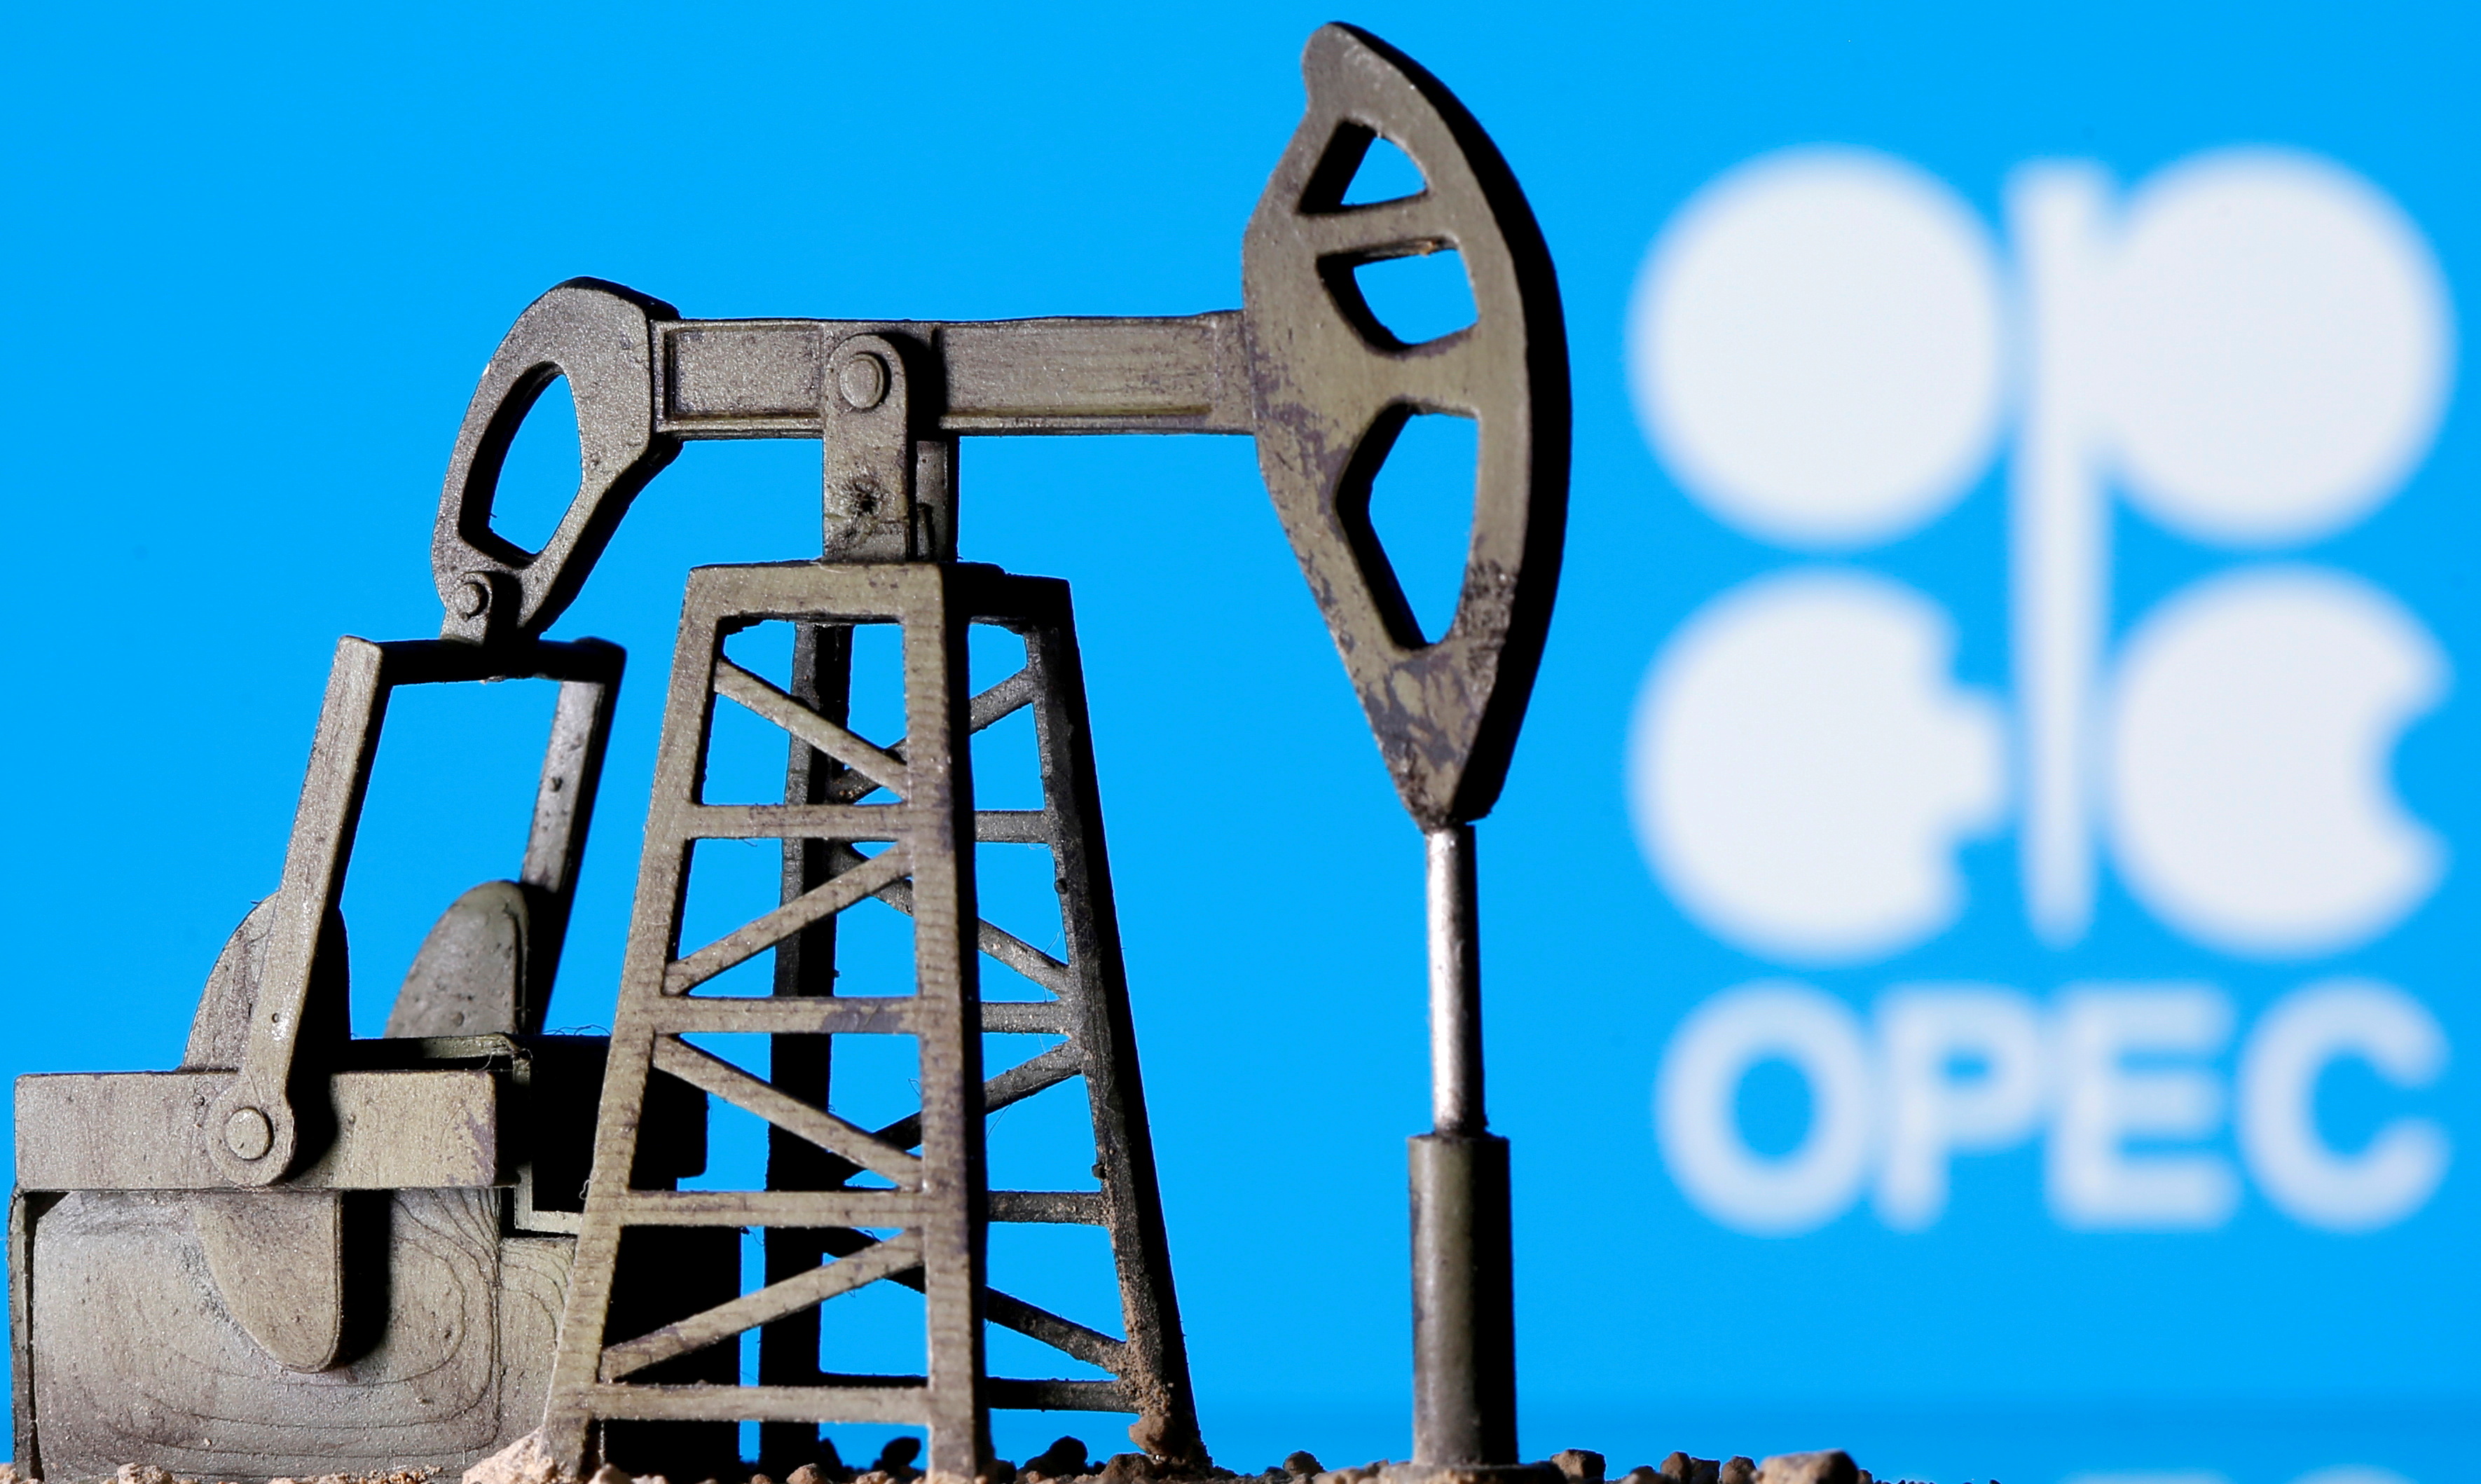 A 3D printed oil pump jack is seen in front of displayed OPEC logo in this illustration picture